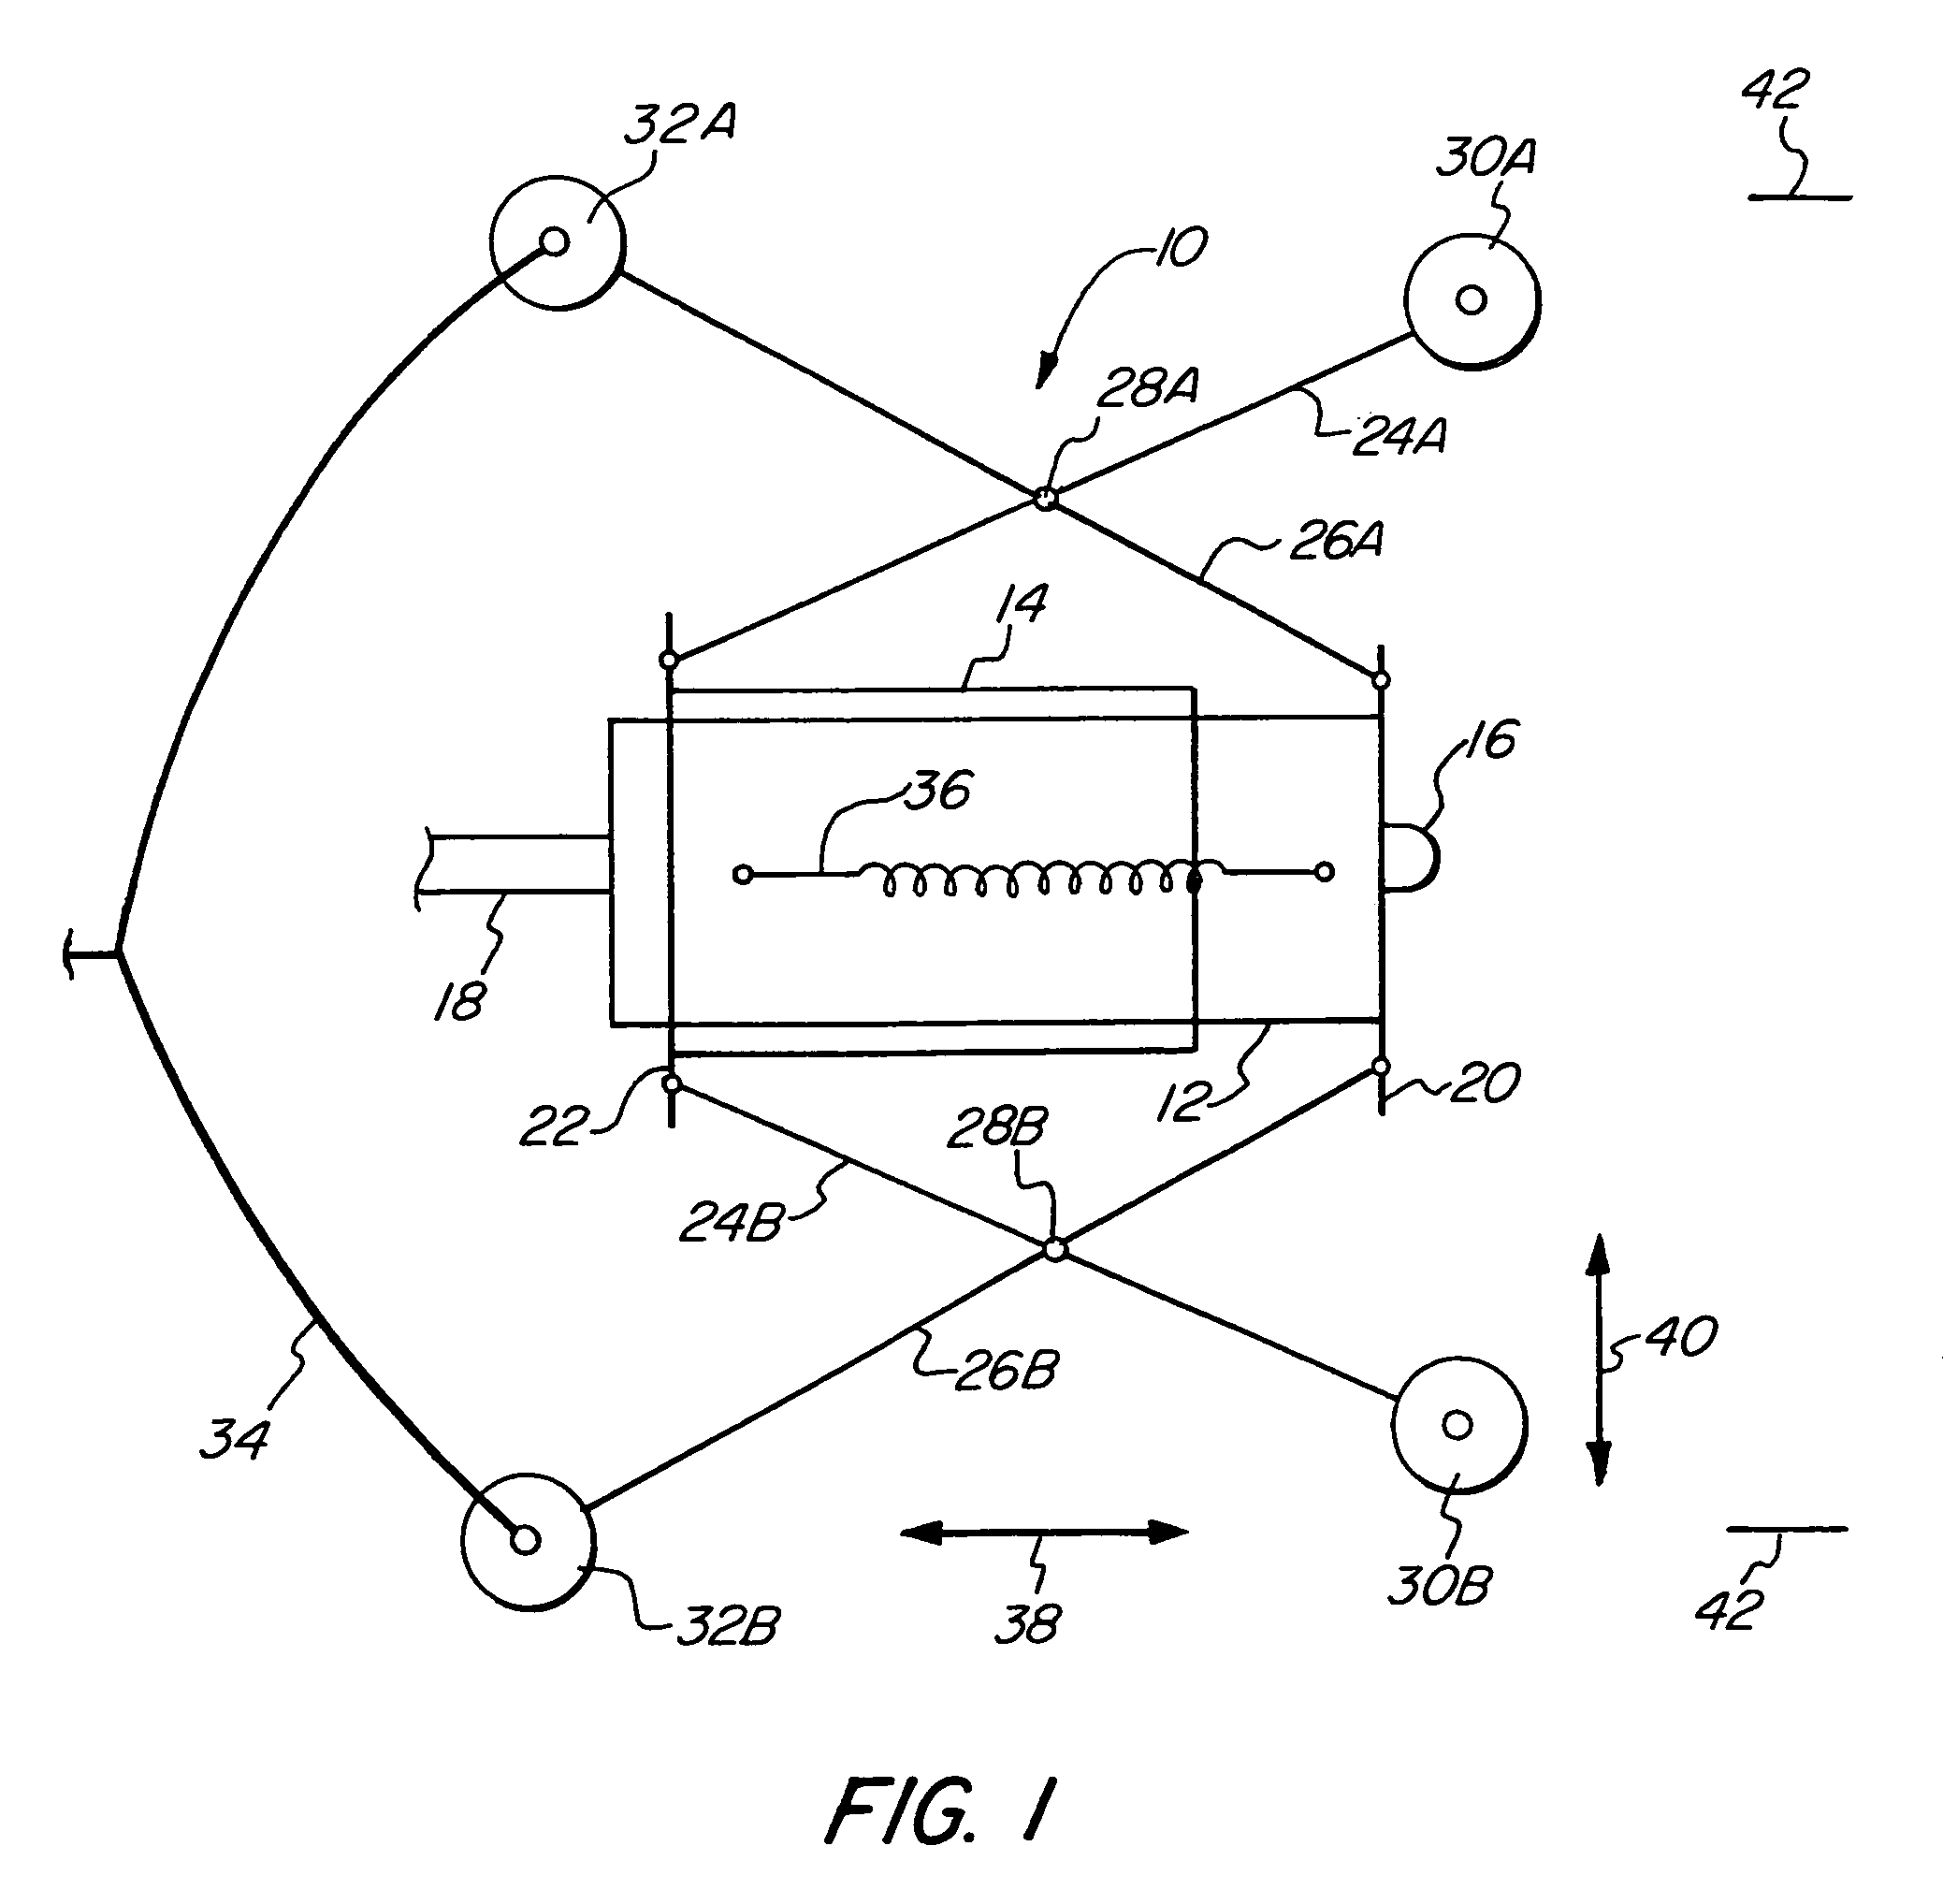 Self-adjusting and centering camera mount for inspecting pipe